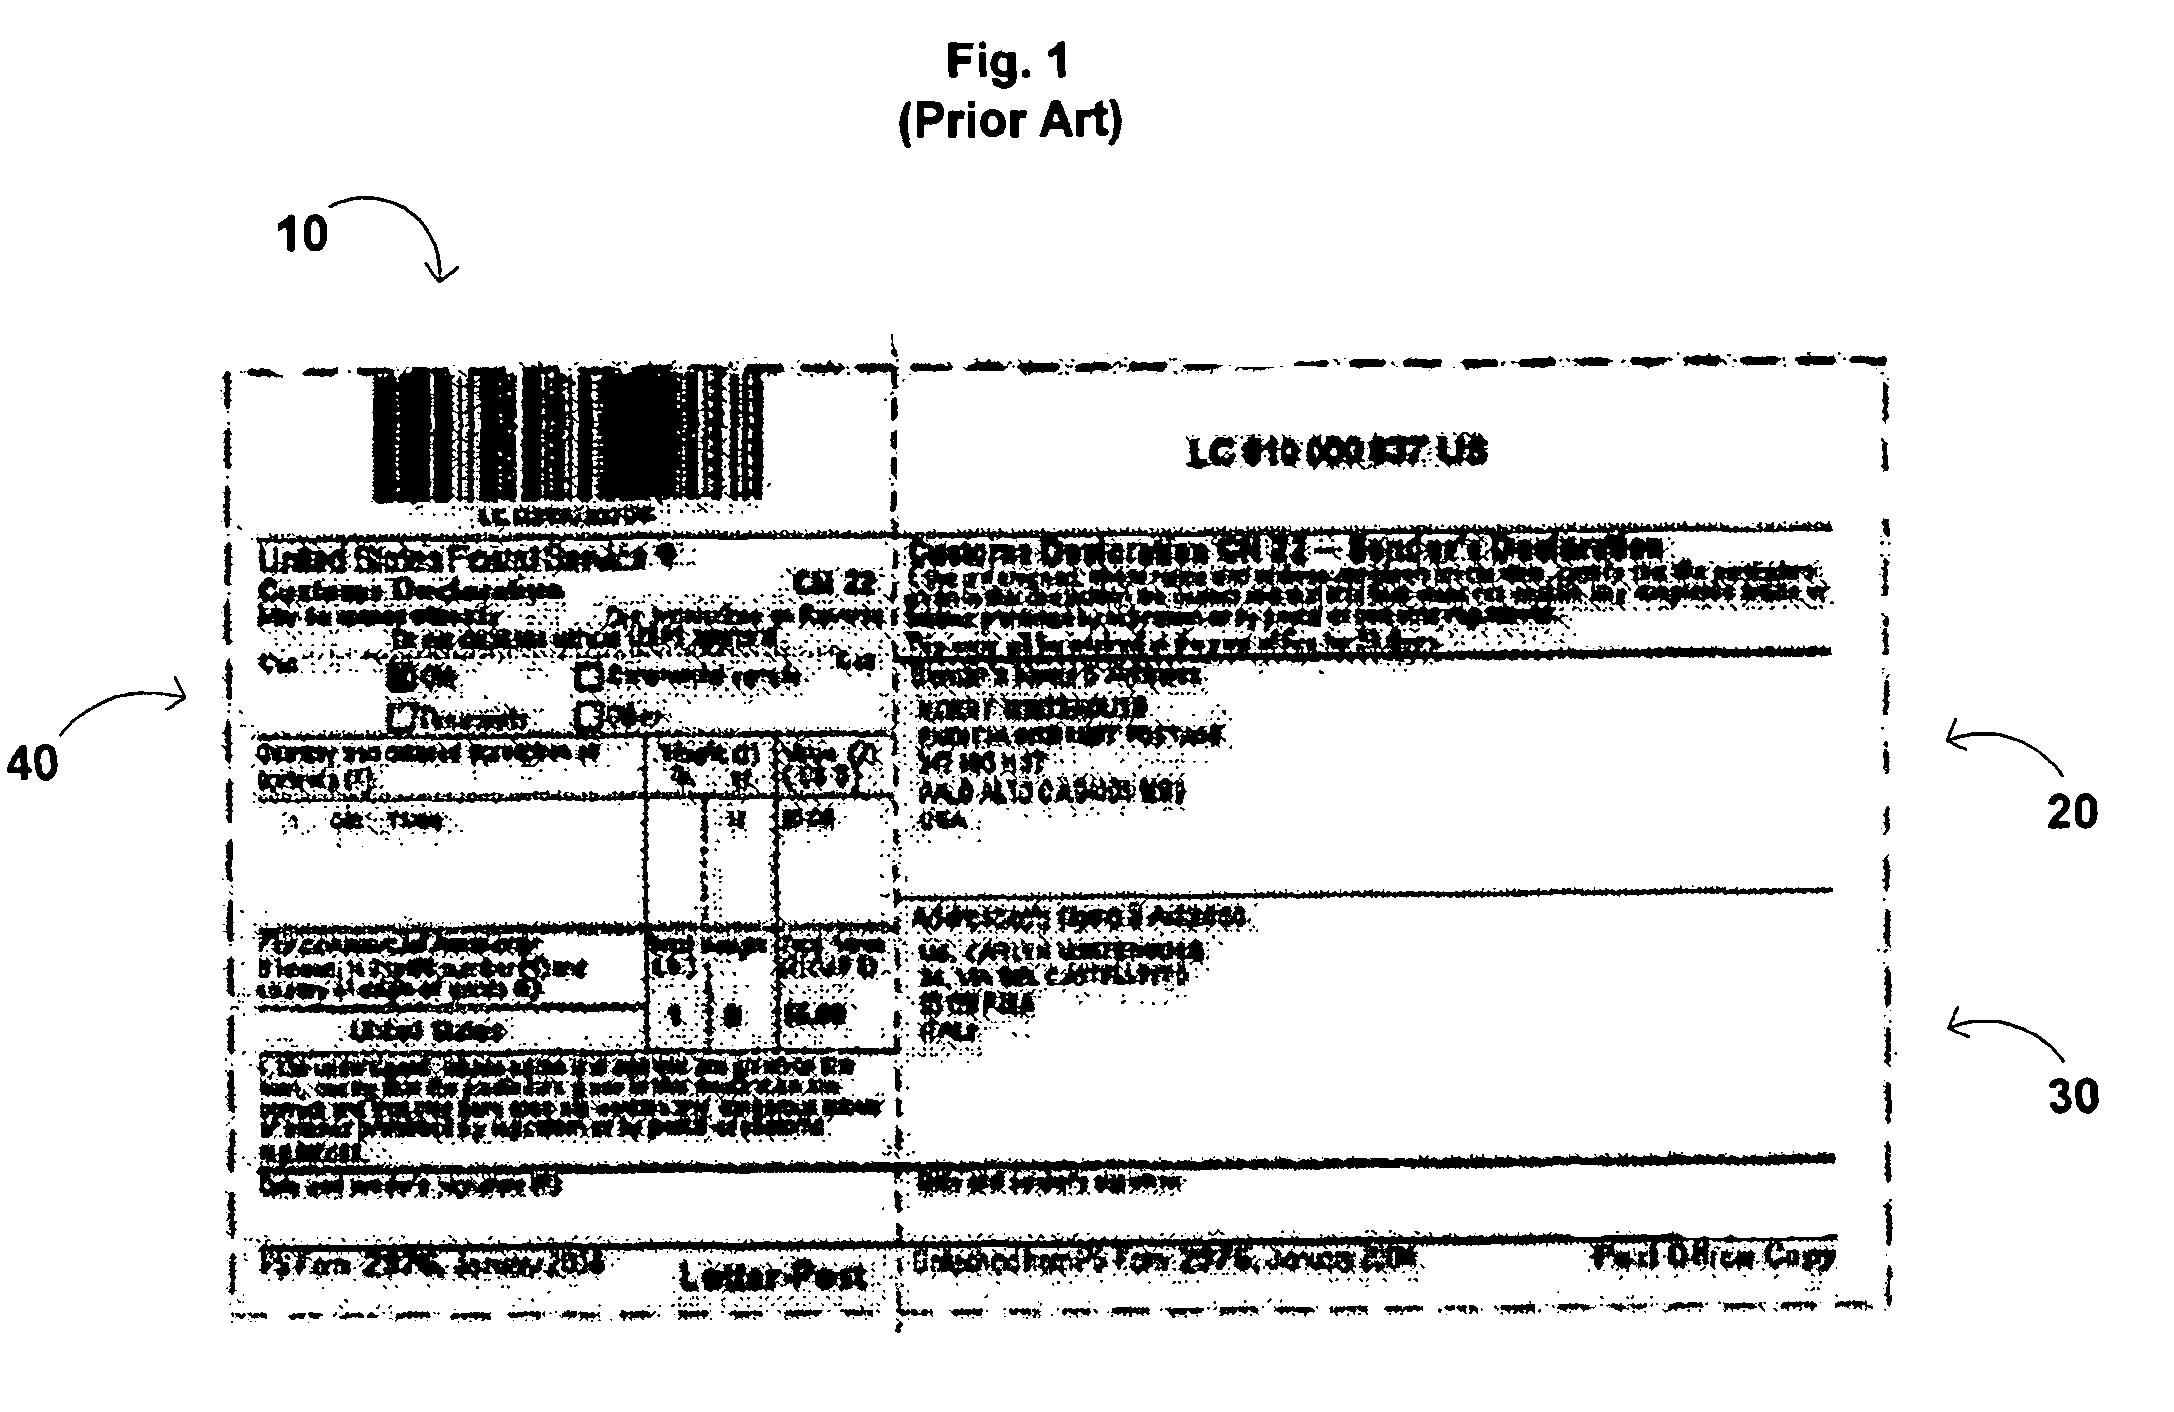 Integrated shipping label and customs form